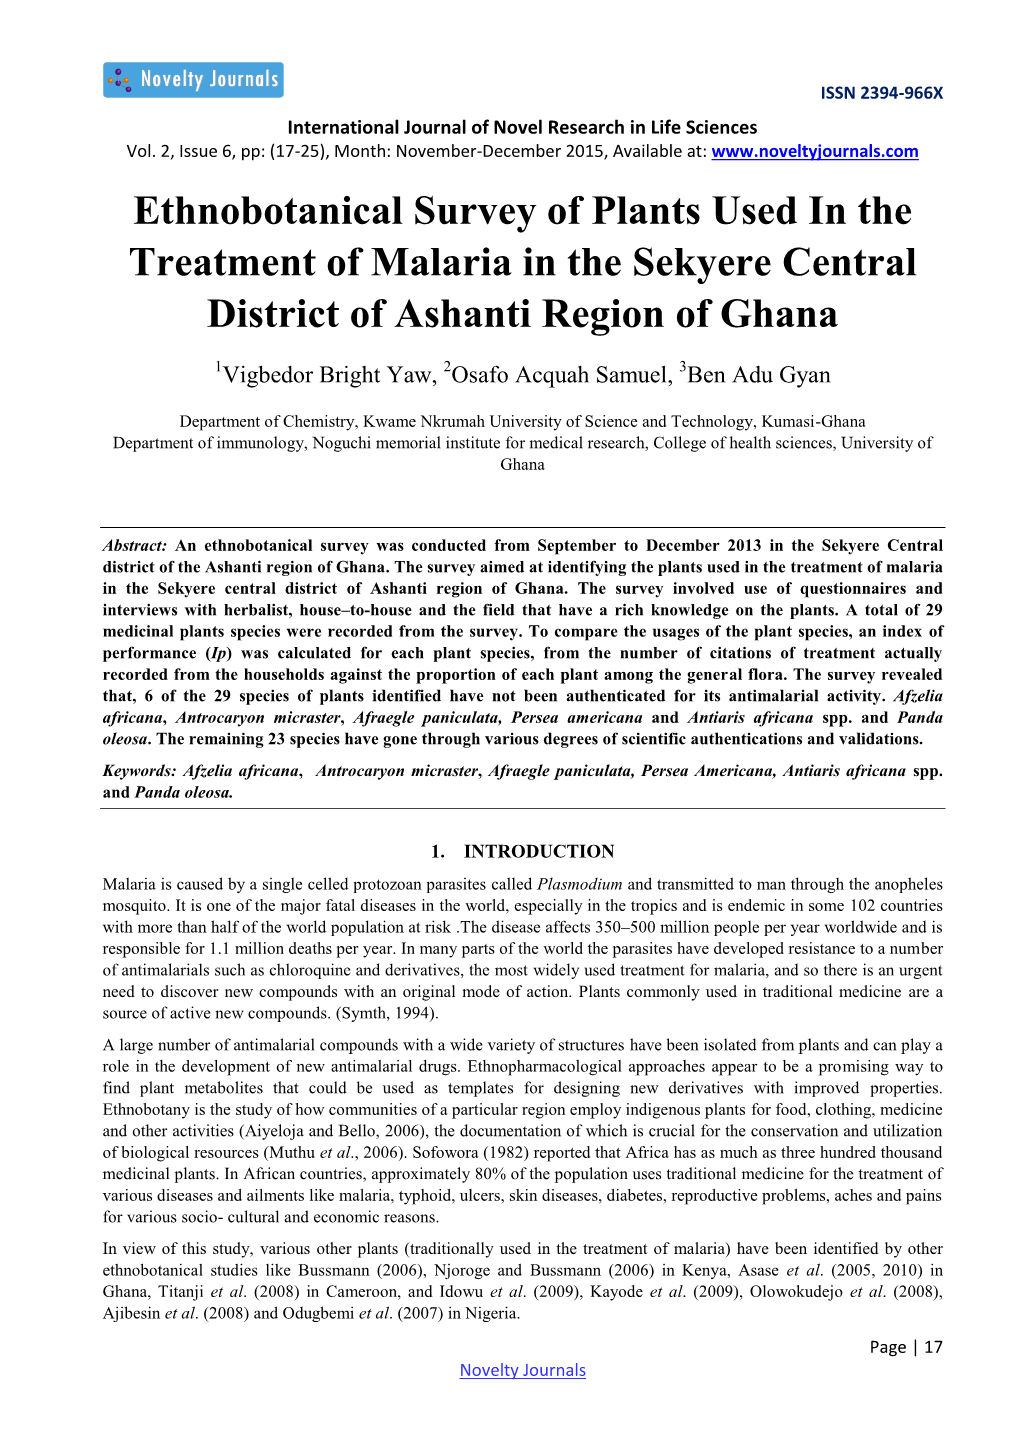 Ethnobotanical Survey of Plants Used in the Treatment of Malaria in the Sekyere Central District of Ashanti Region of Ghana